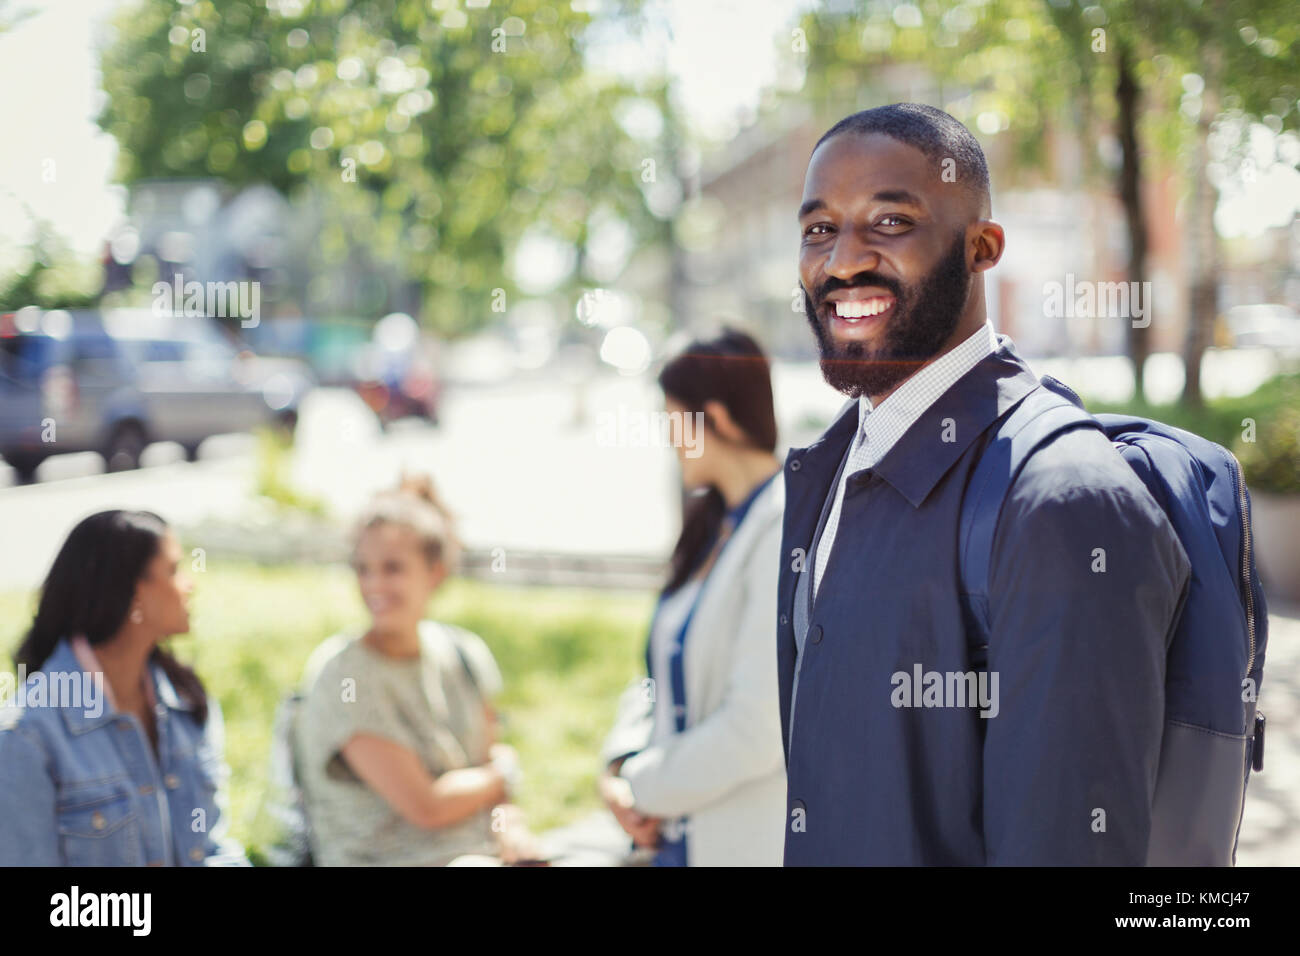 Portrait smiling businessman with backpack in urban park Stock Photo